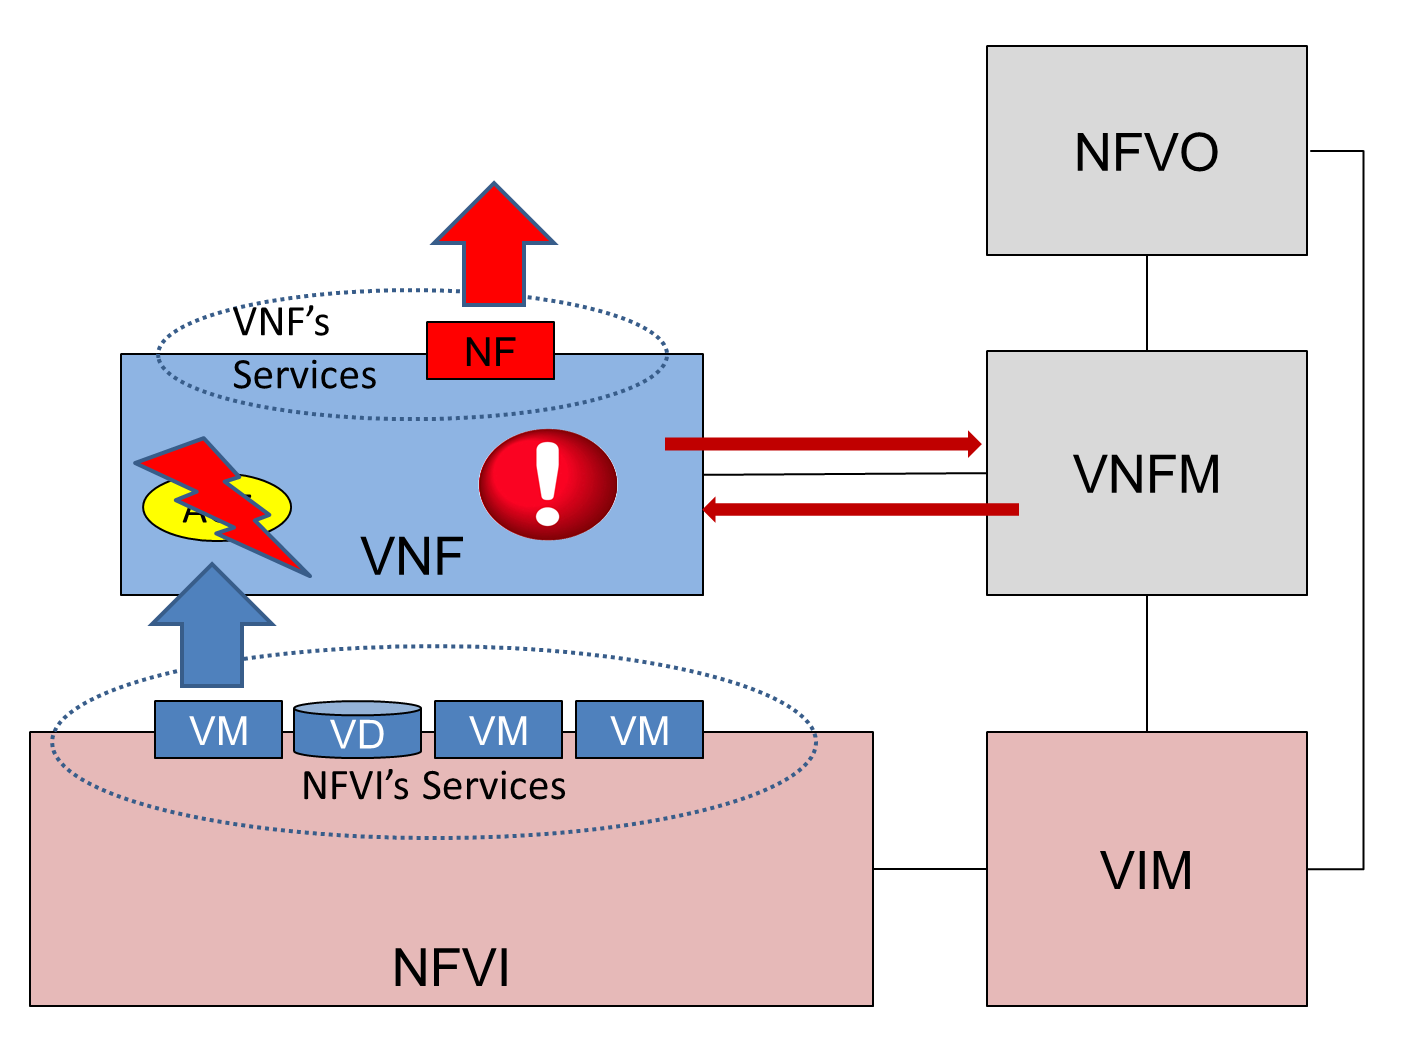 VNFC failure in a stateless VNF with no redundancy